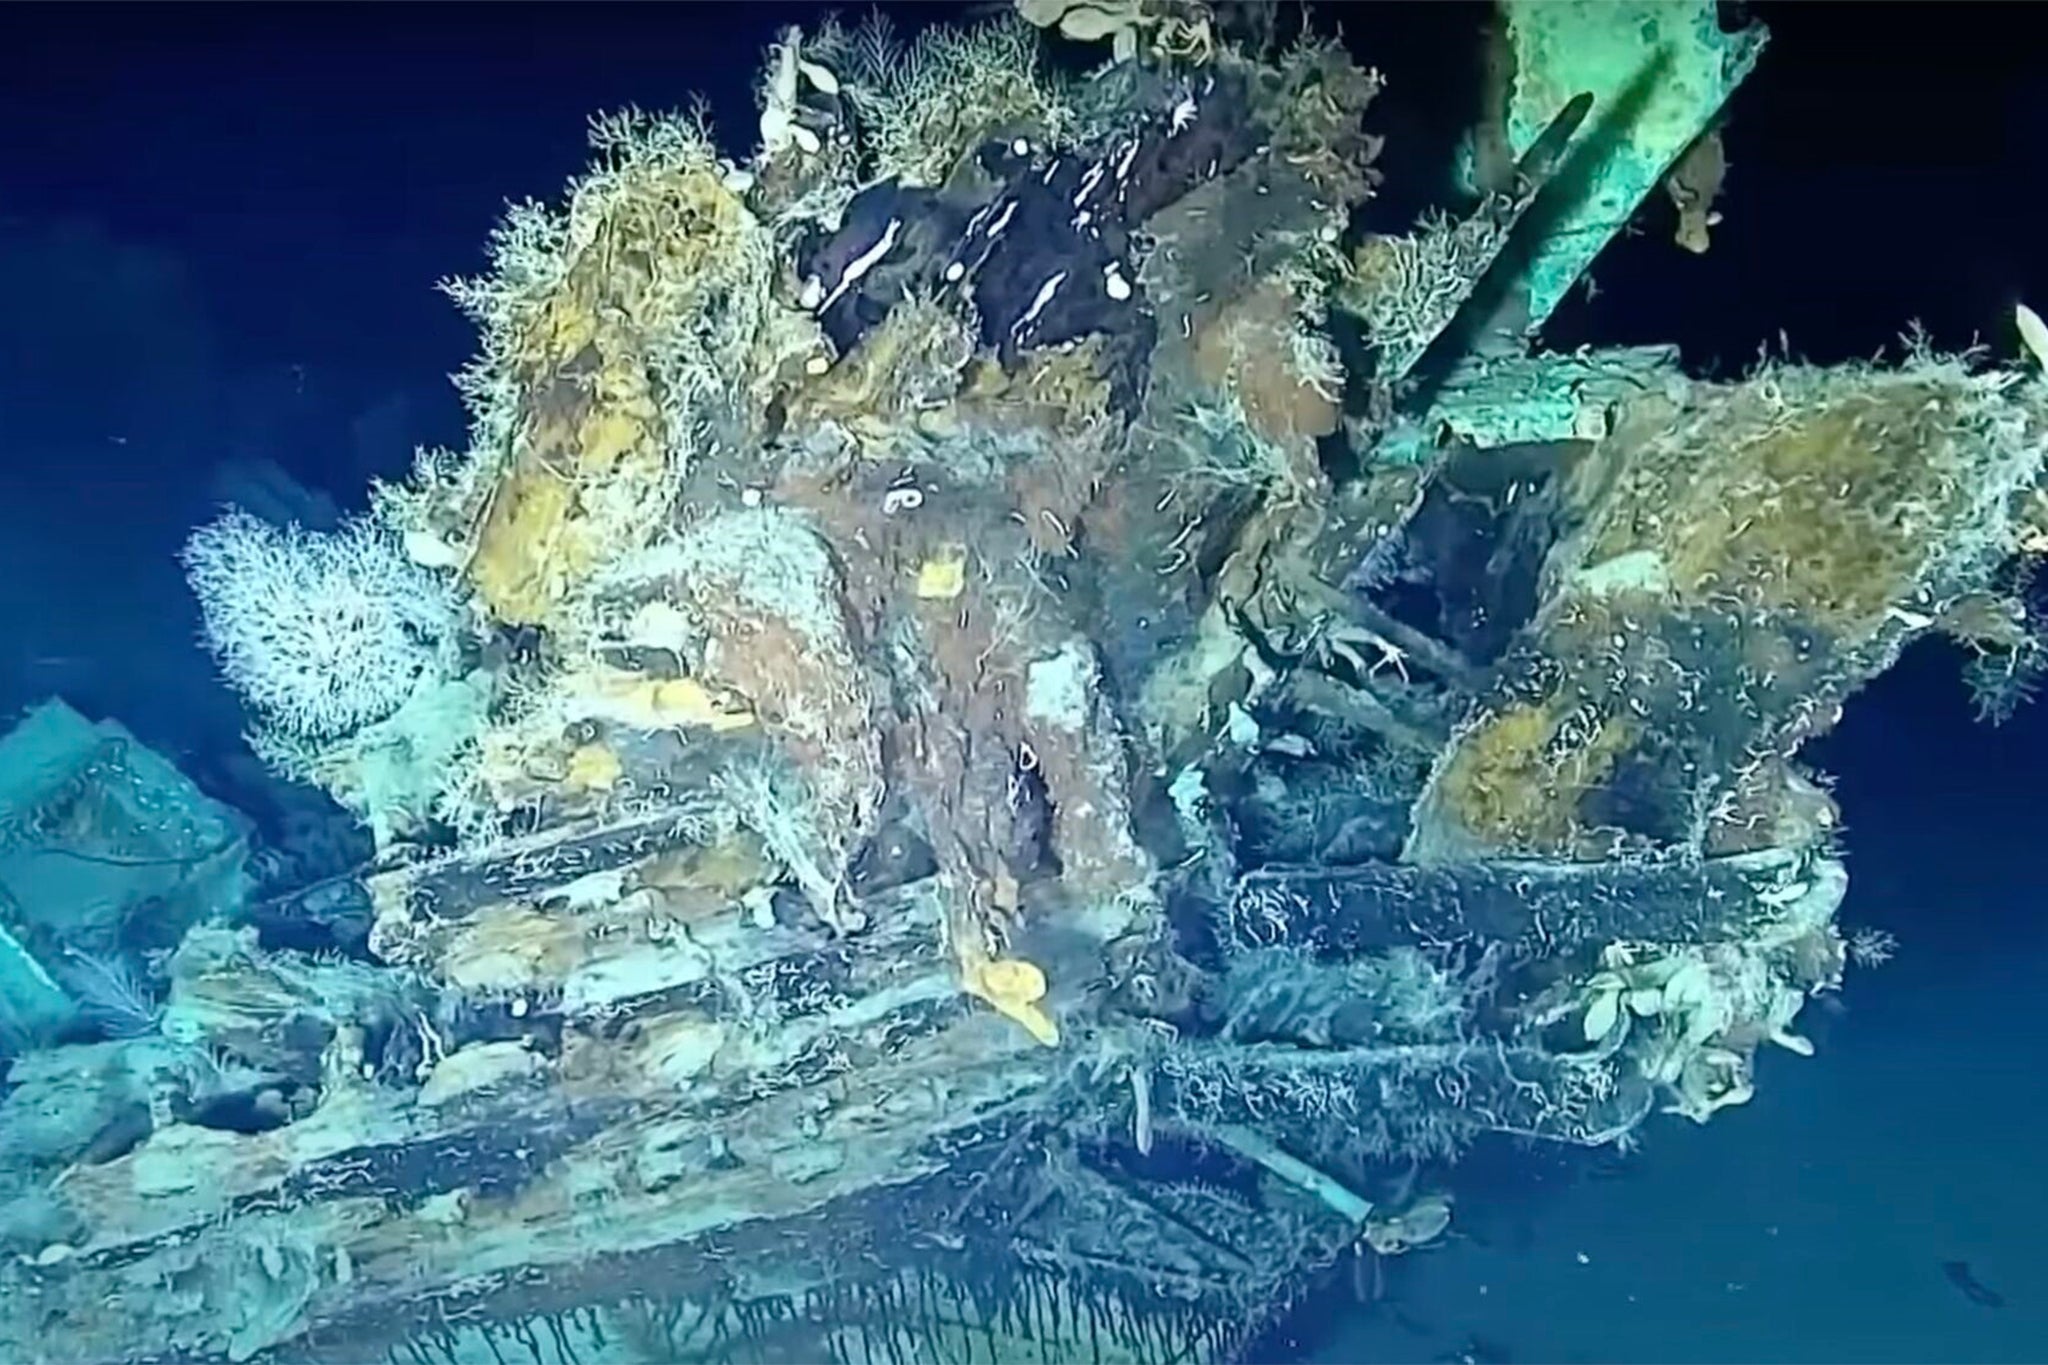 The San Jose was discovered by a team of navy divers in 2015